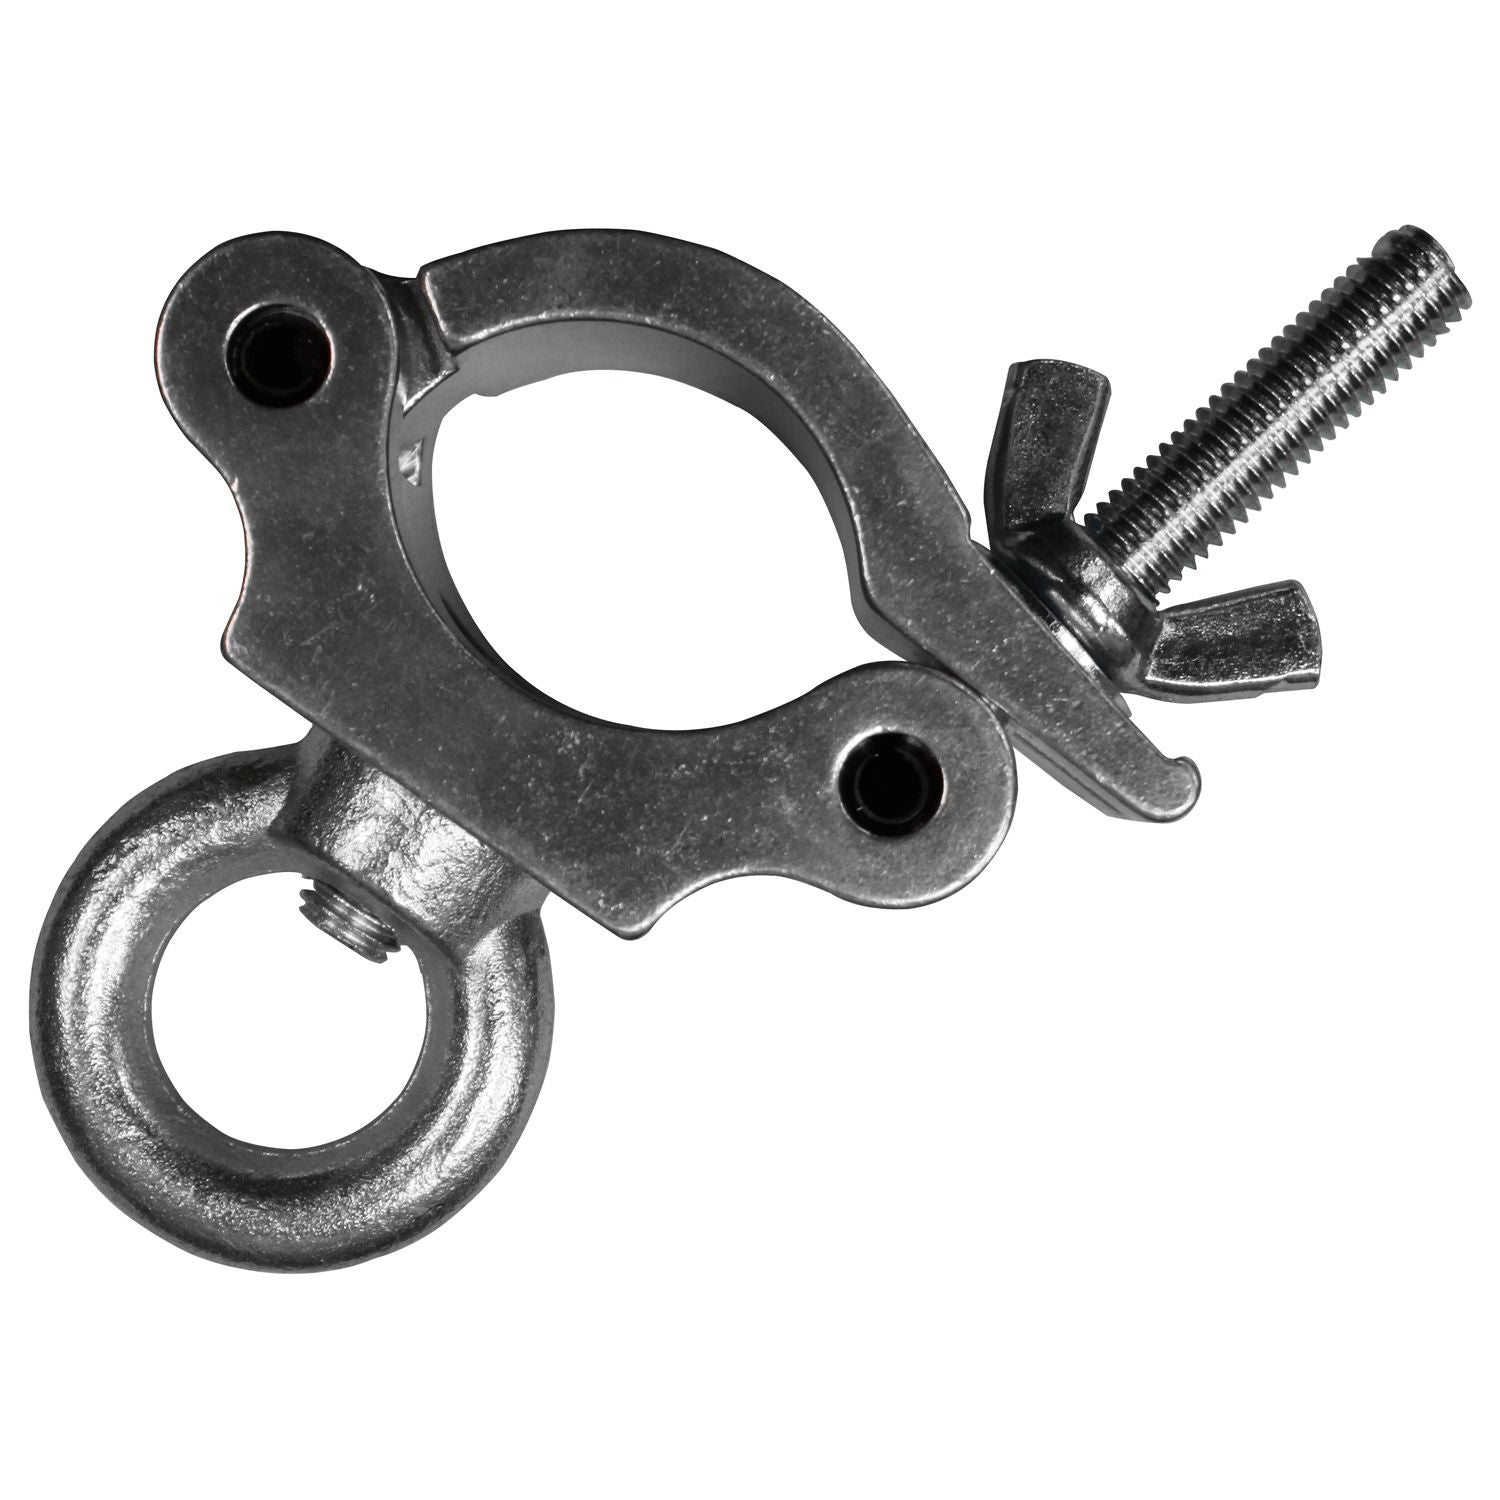 Odyssey LACPE50, Aluminum Pro Wide Lighting Clamp With Eye Bolt - Hollywood DJ